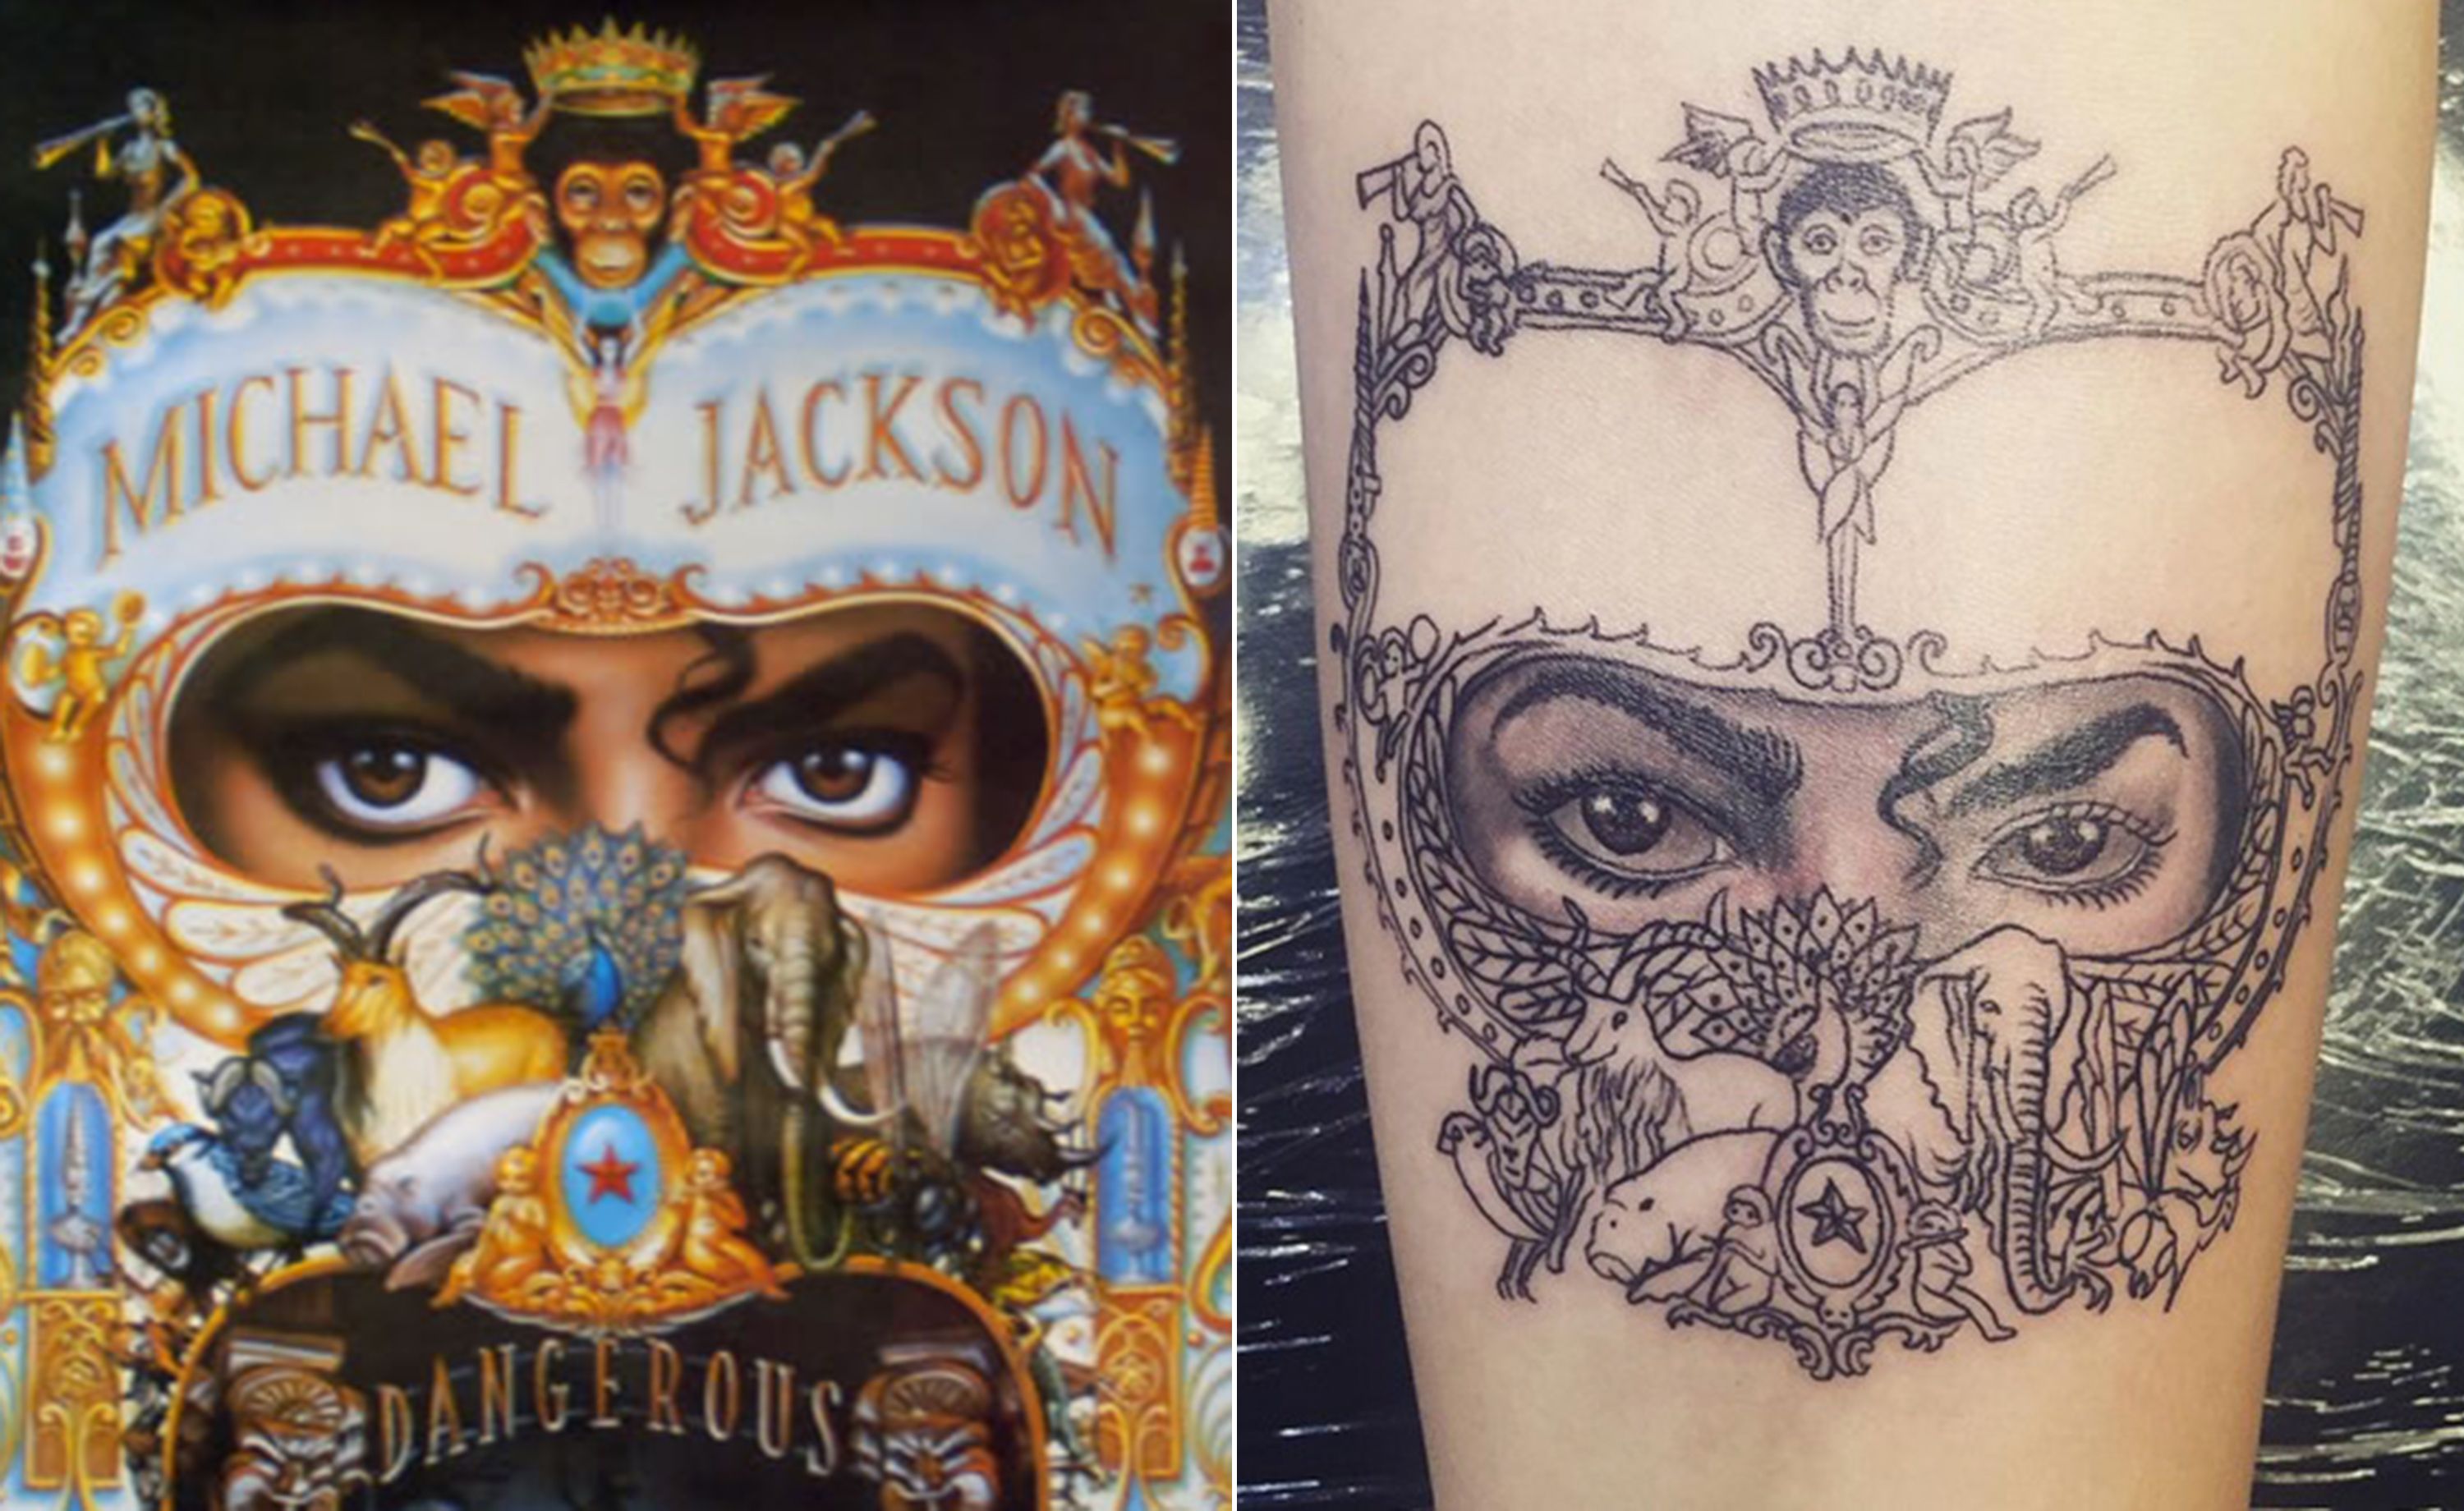 Michael Jackson tattoo on the back of the left arm